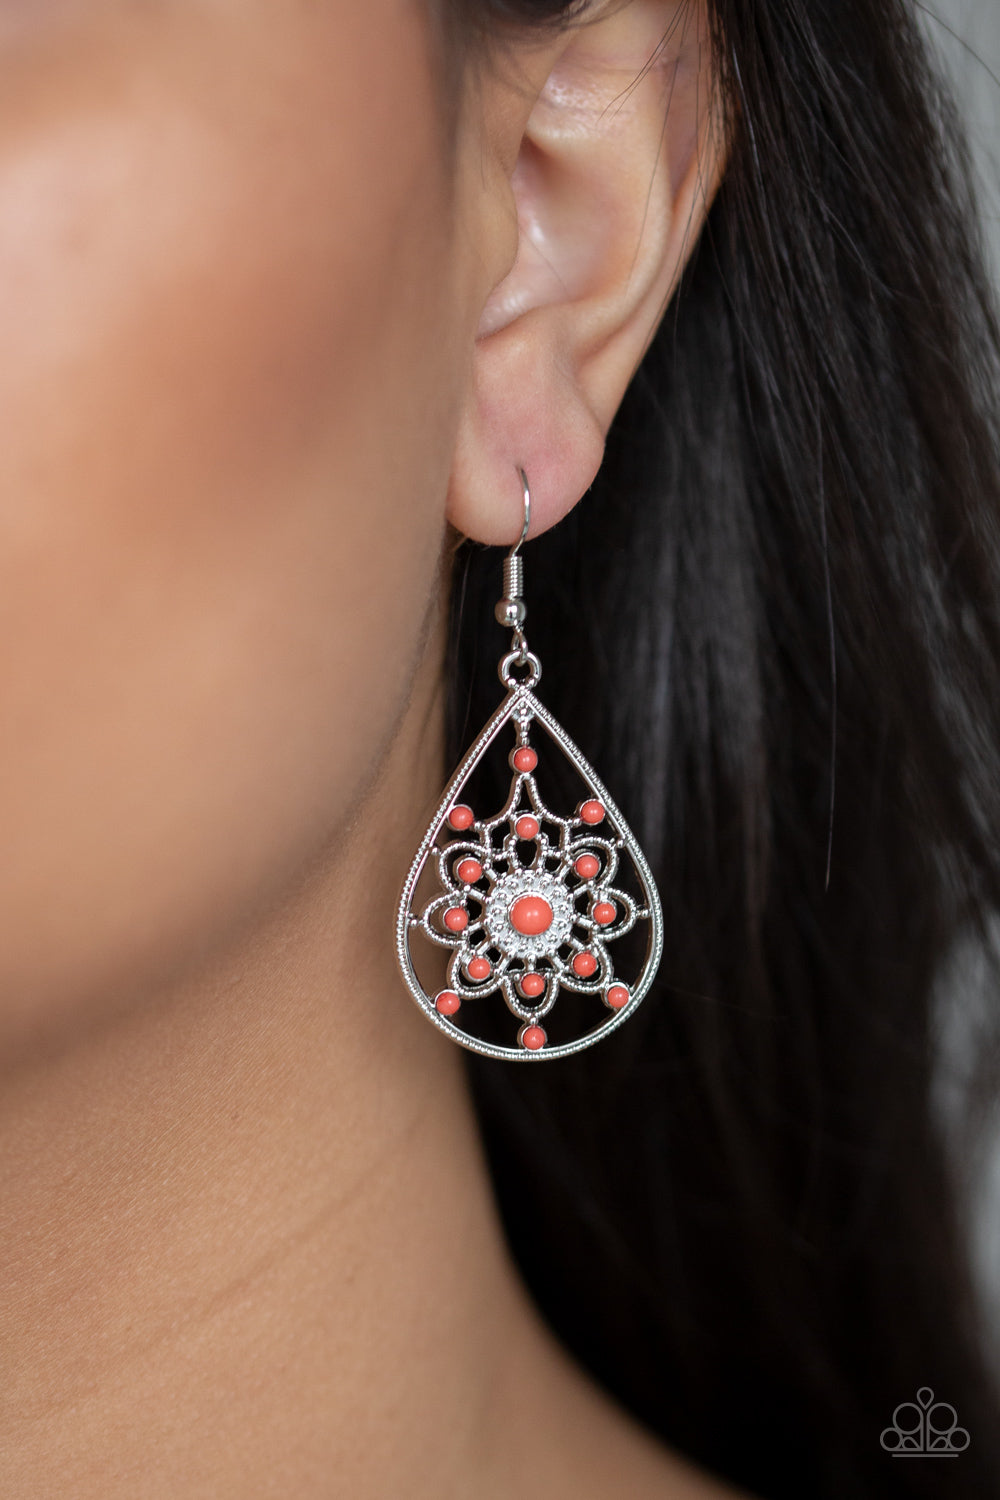 Paparazzi A Flair For Fabulous - Orange / Coral Beads - Silver Earrings - $5 Jewelry With Ashley Swint